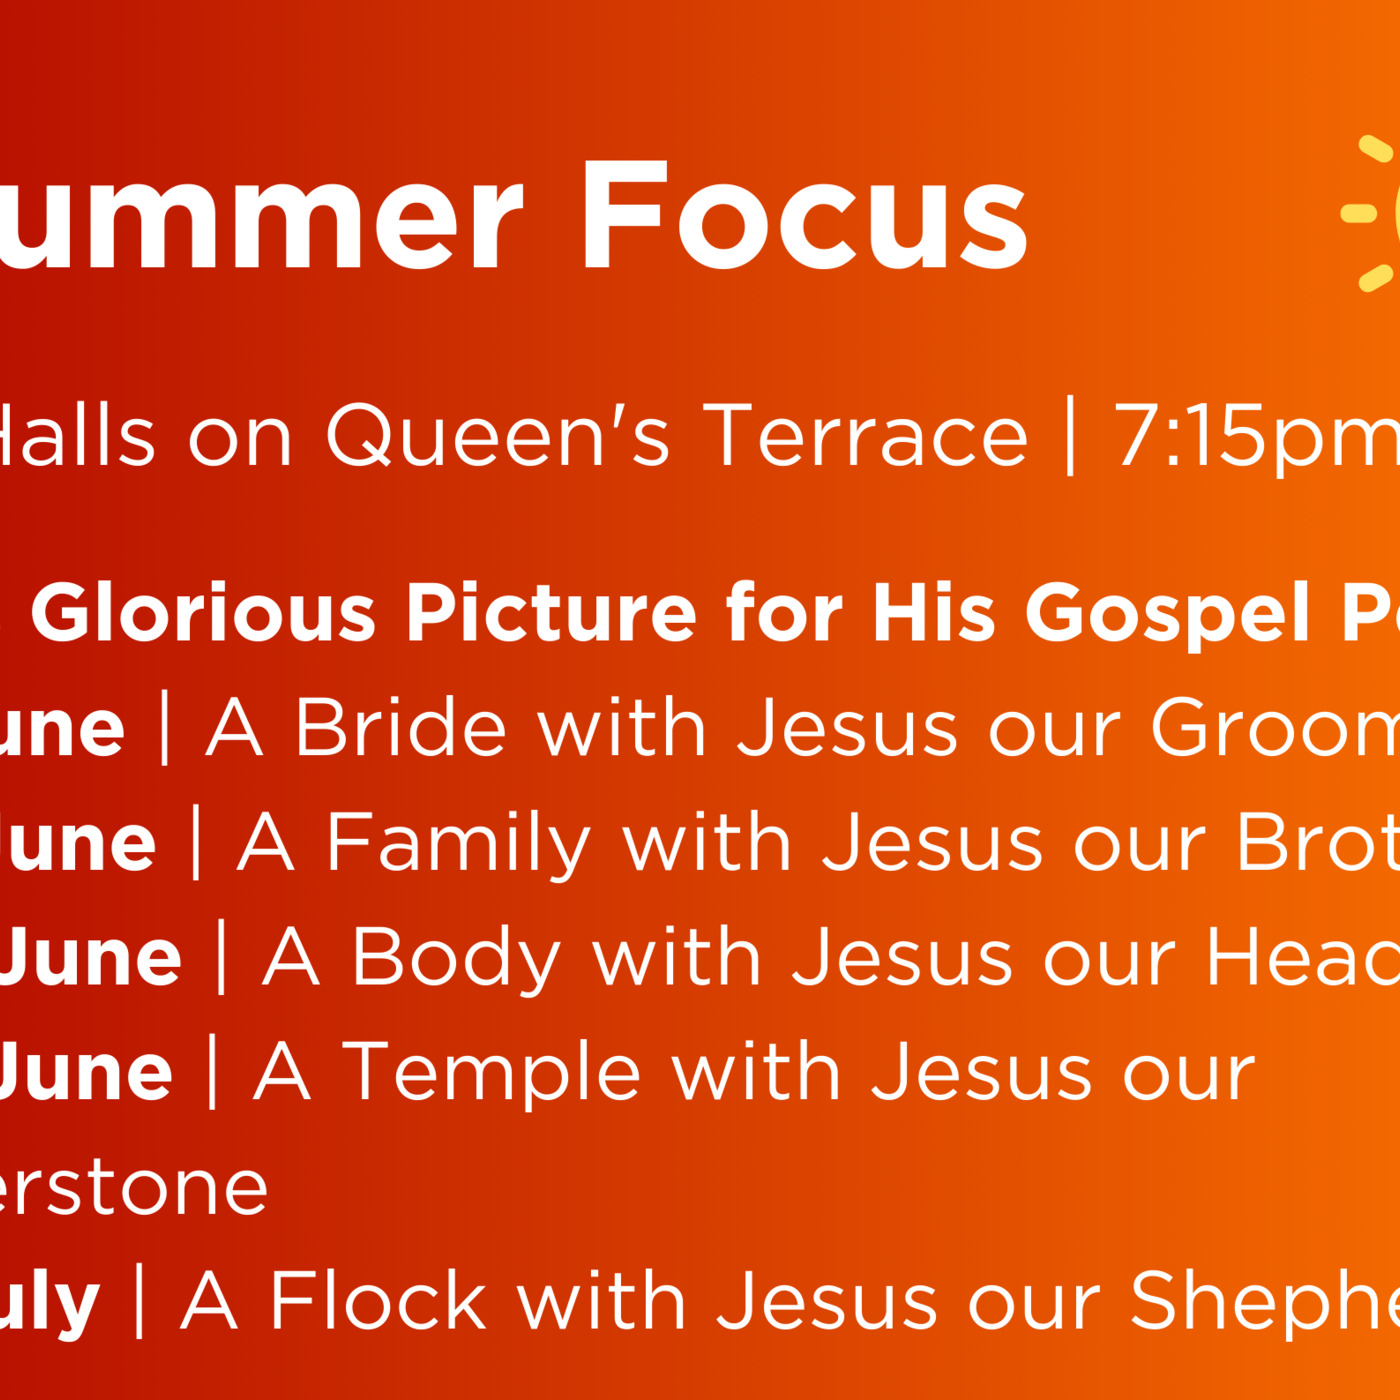 A Flock with Jesus our Shepherd - Summer Focus